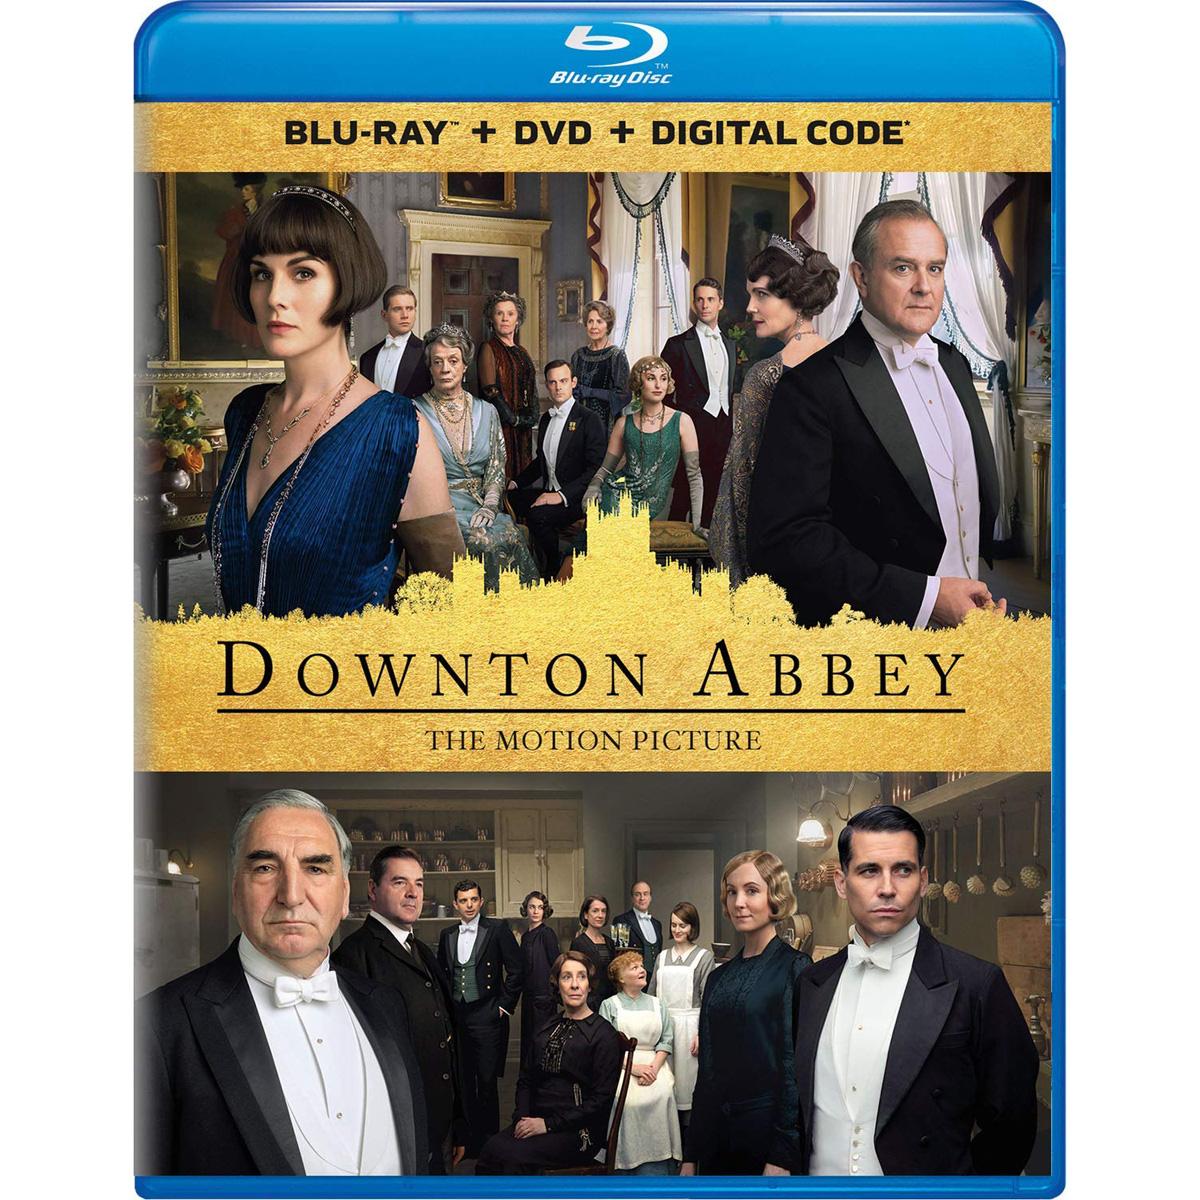 Downton Abbey The Motion Picture Blu-ray and DVD for $5.99